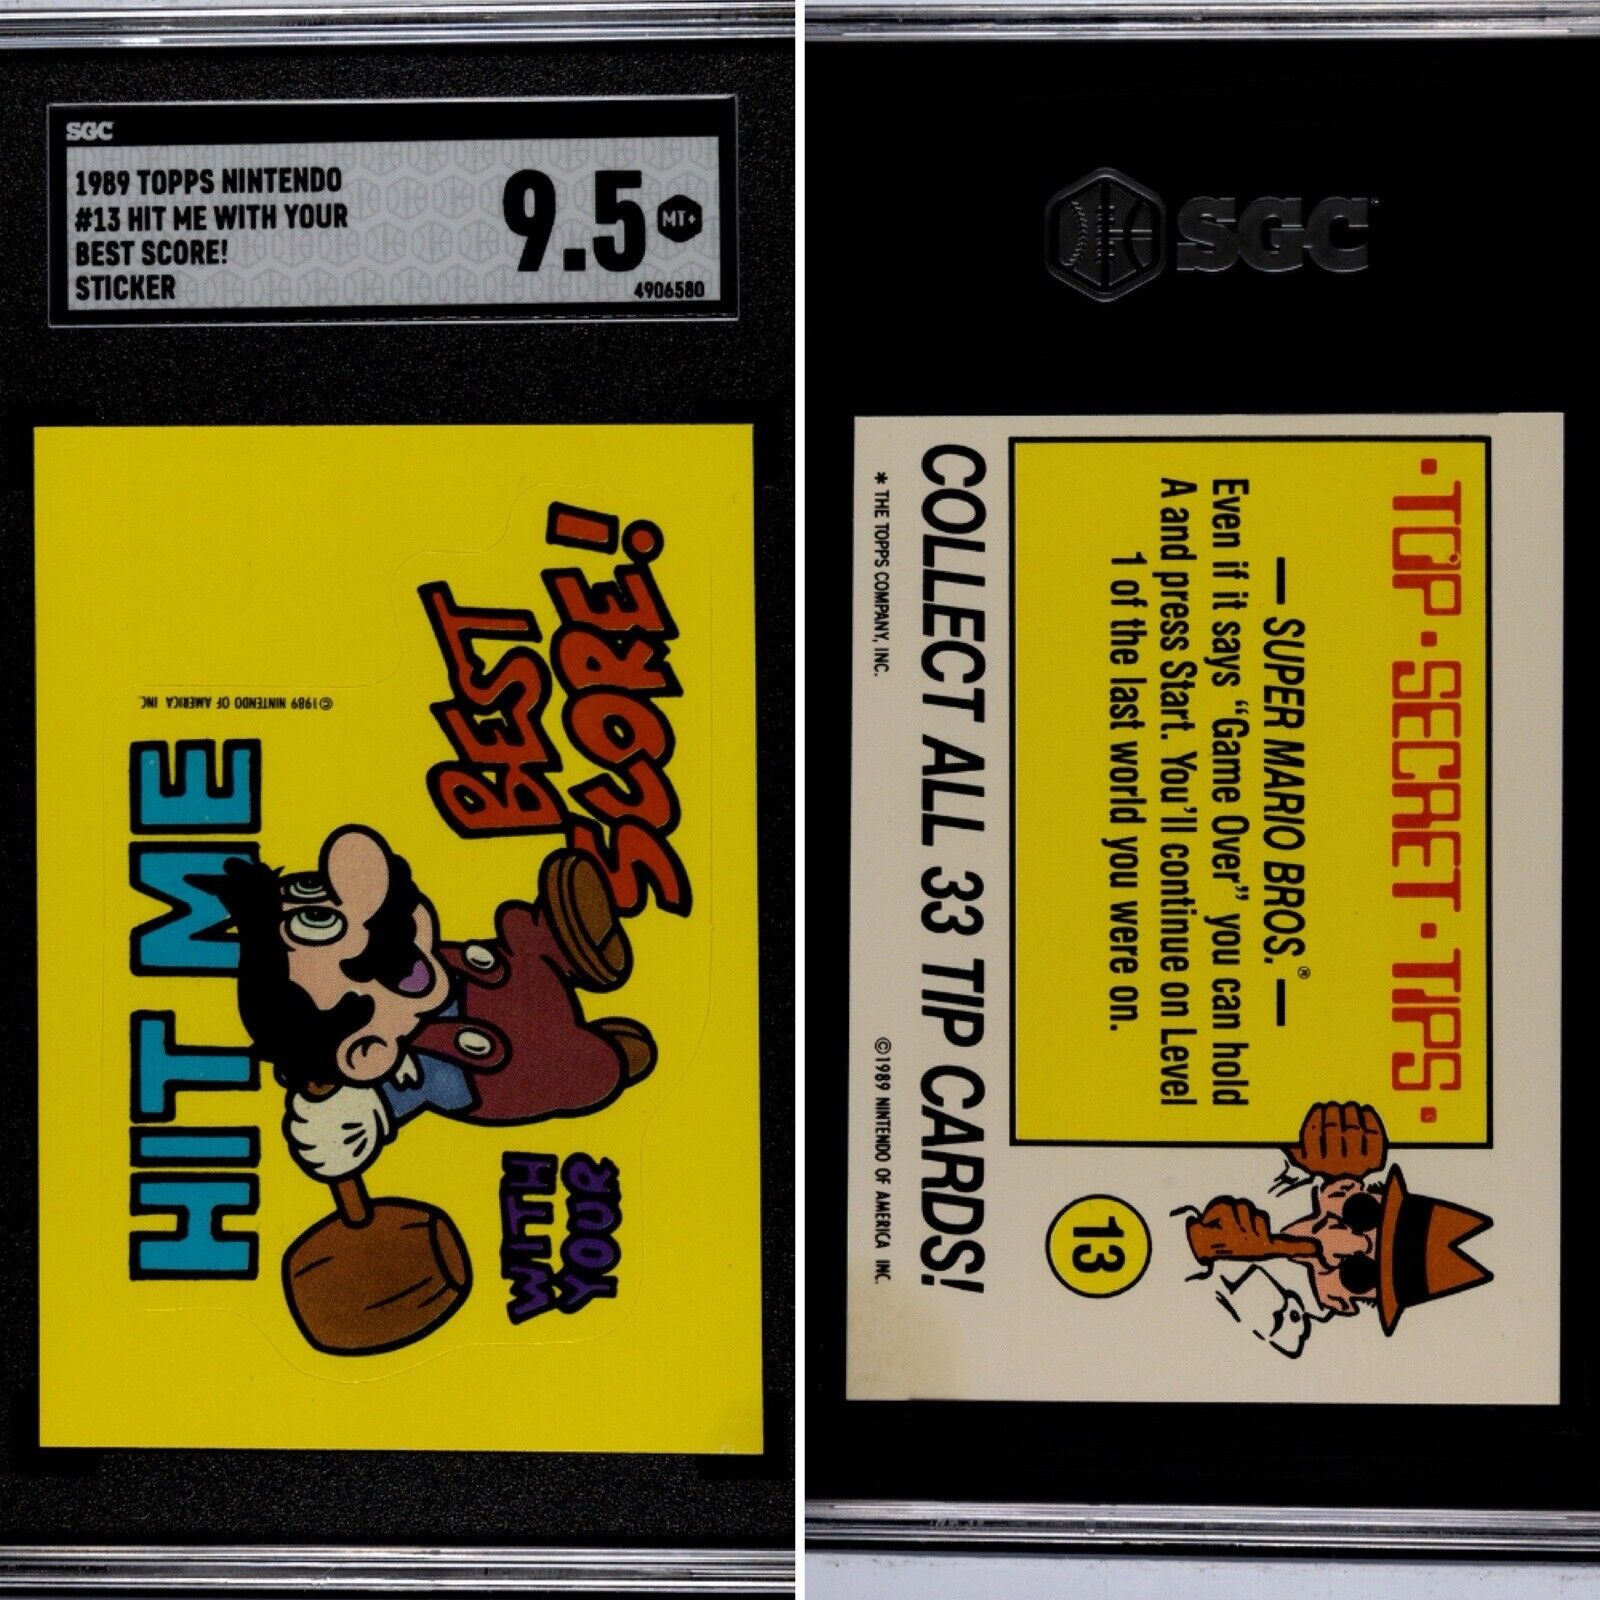 SGC 9.5 Topps Nintendo #13 Hit Me With Your Best Score Sticker